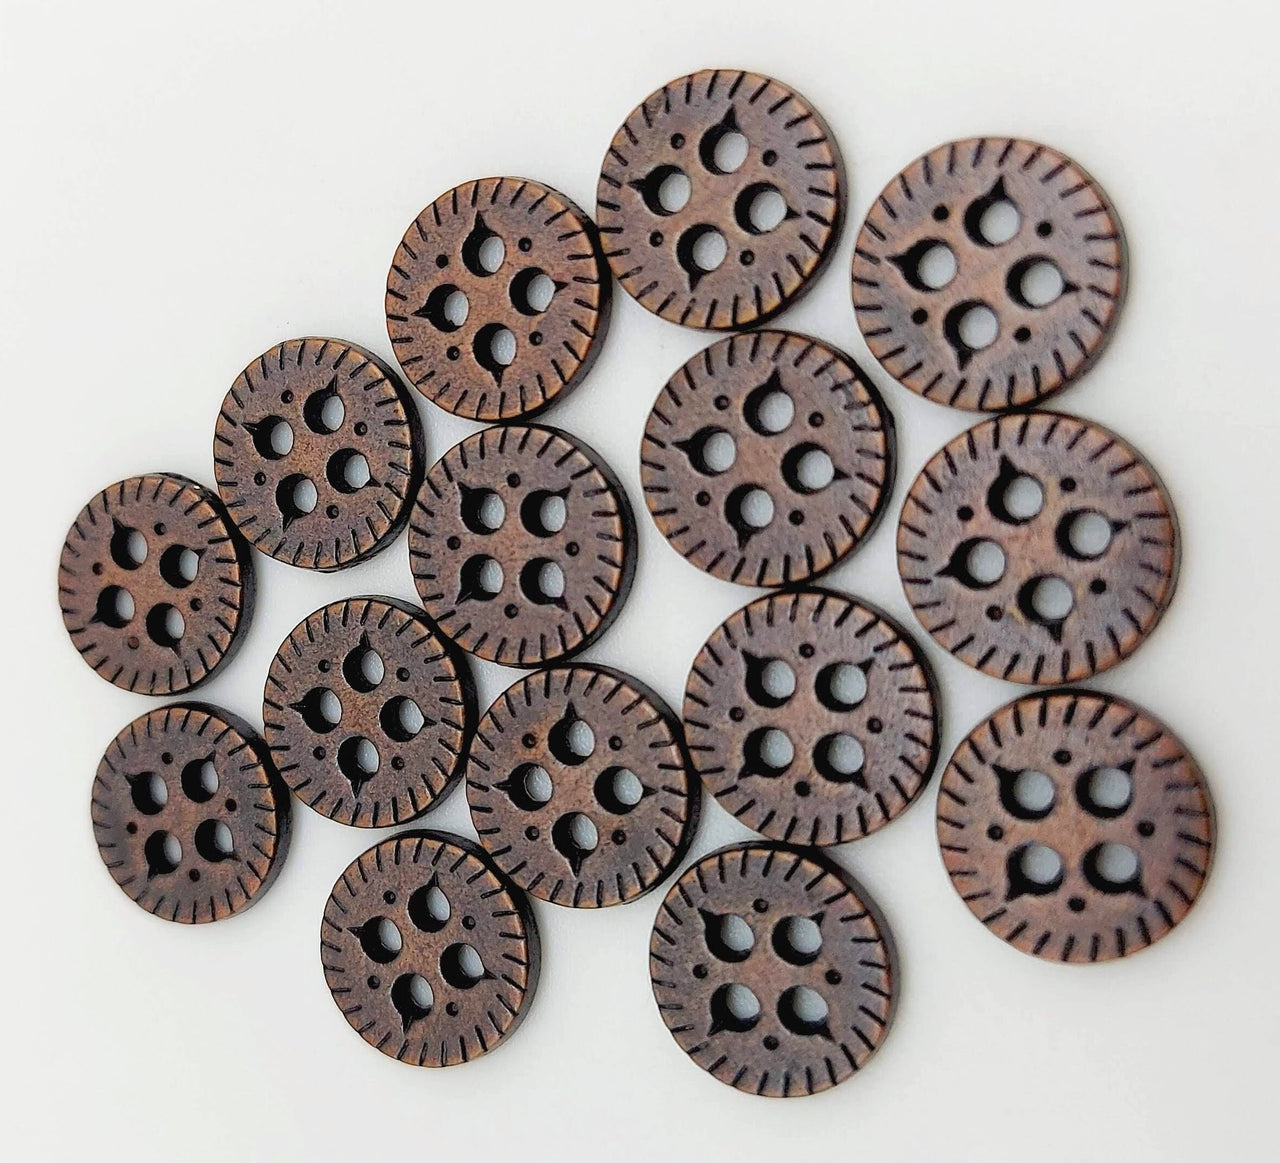 Copper Tone Carved Round Small Metal Buttons, 10mm buttons, Craft Buttons